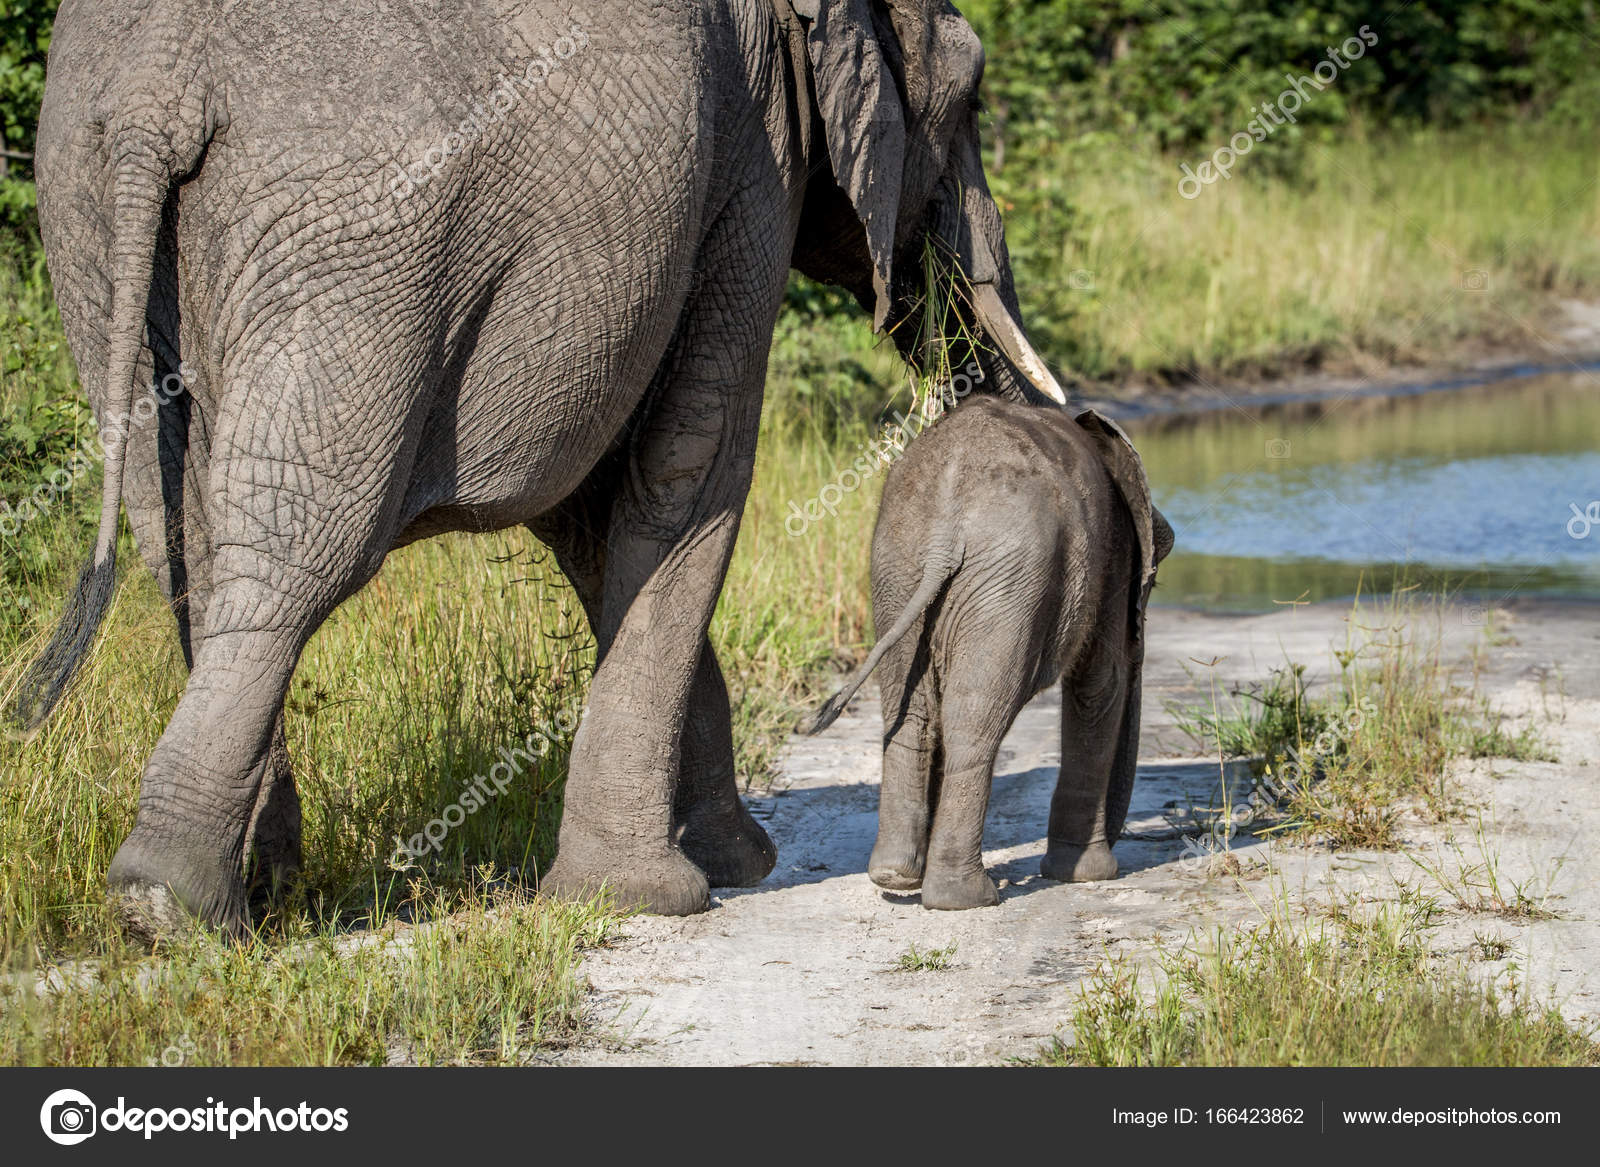 Baby Elephant Walking Away Mother And Baby Elephant Walking Away Stock Photo C Simoneemanphotography